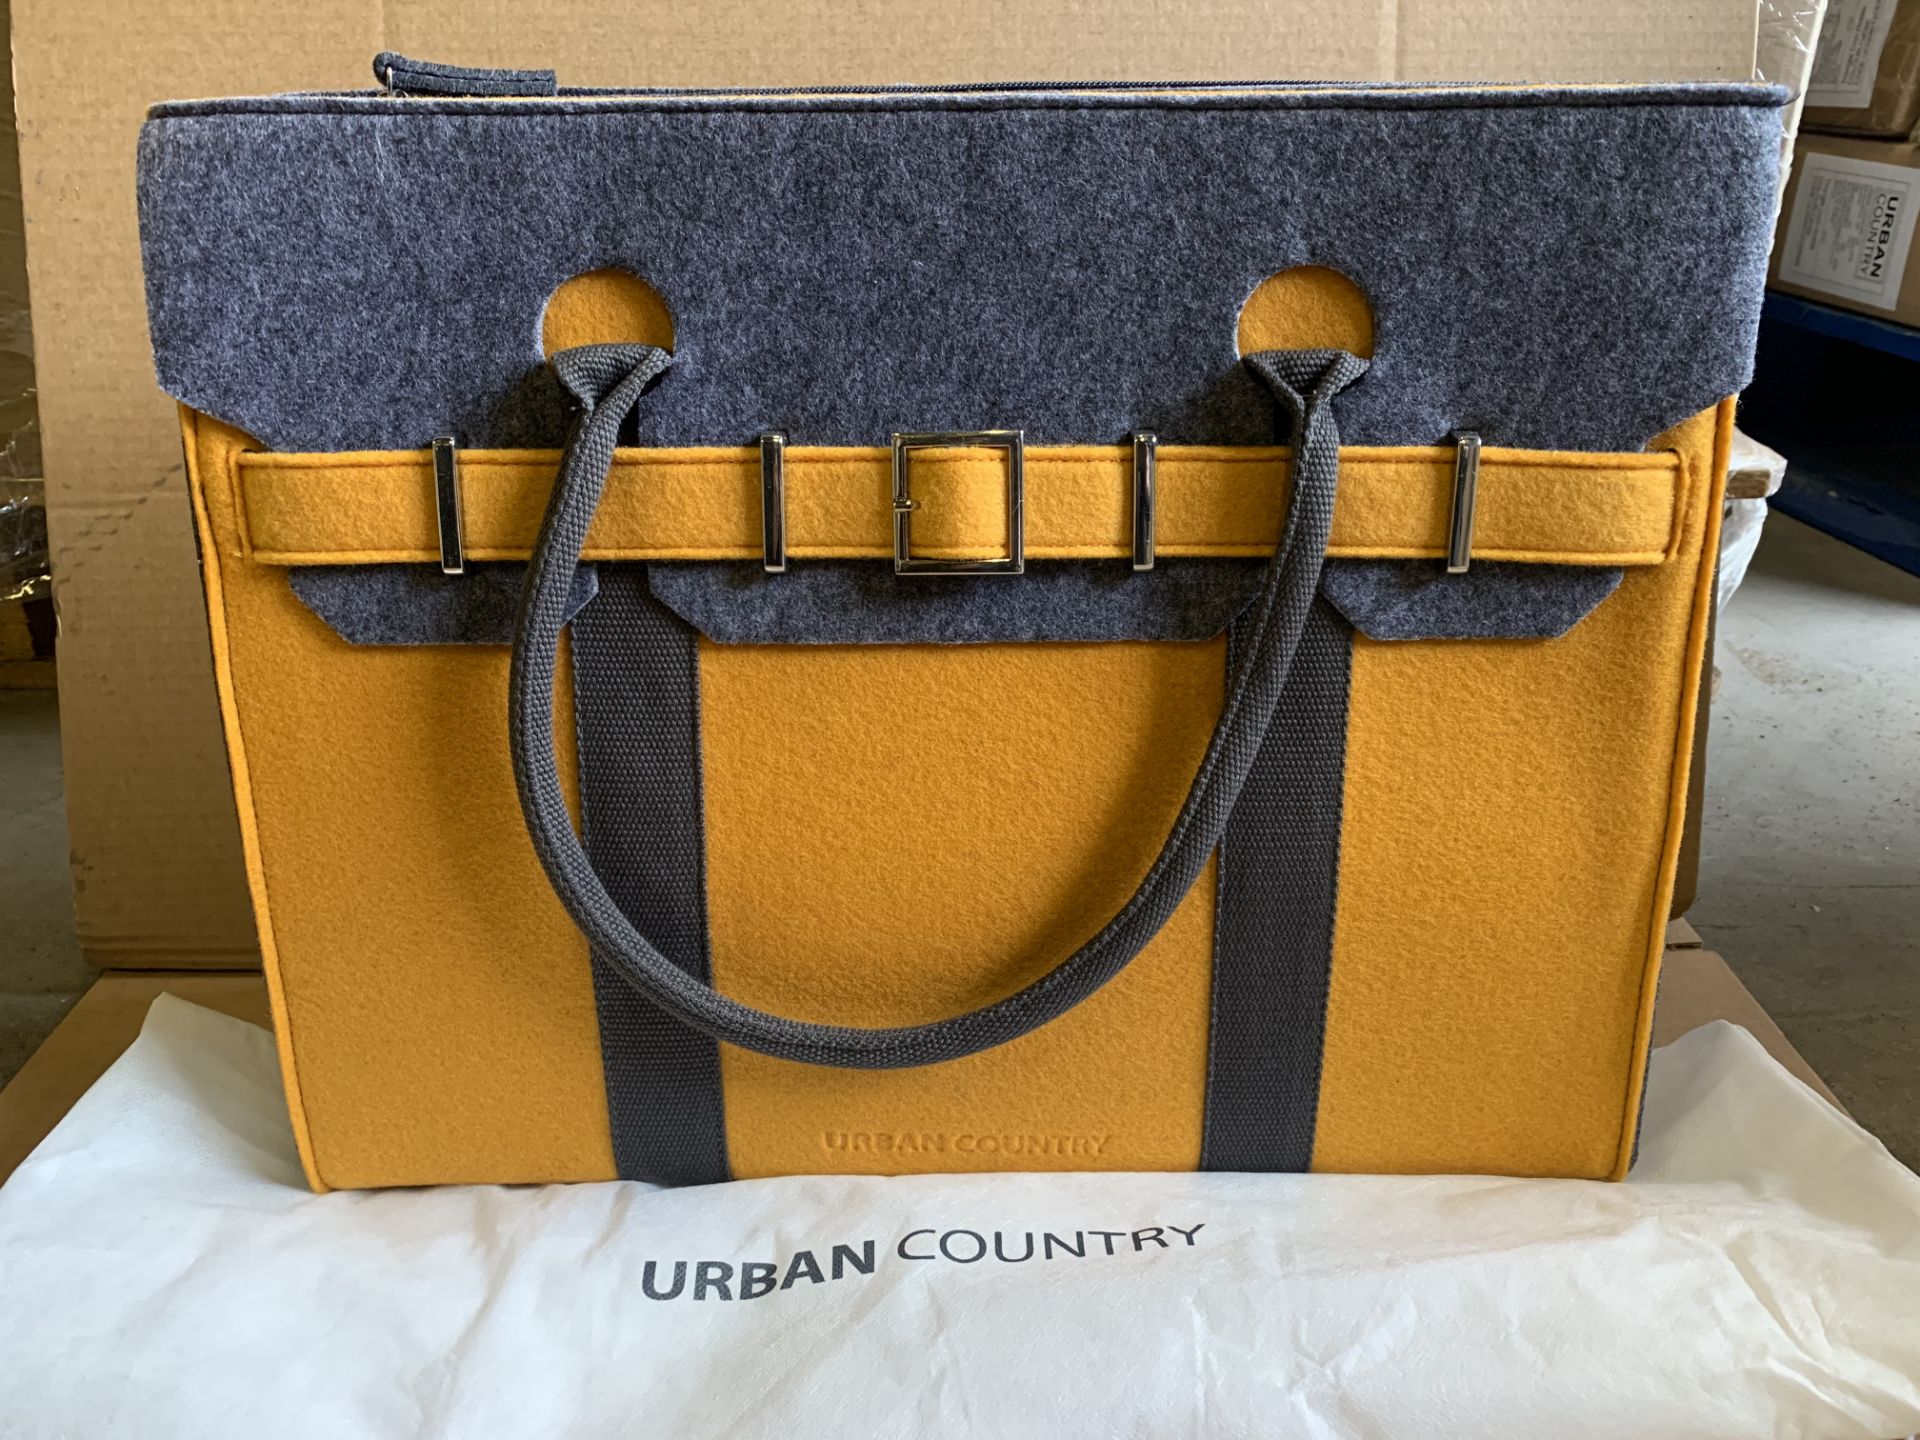 5 X BRAND NEW URBAN COUNTRY LARGE GRIP BAG WITH POCKETS GREY AND MUSTARD RRP £50 EACH